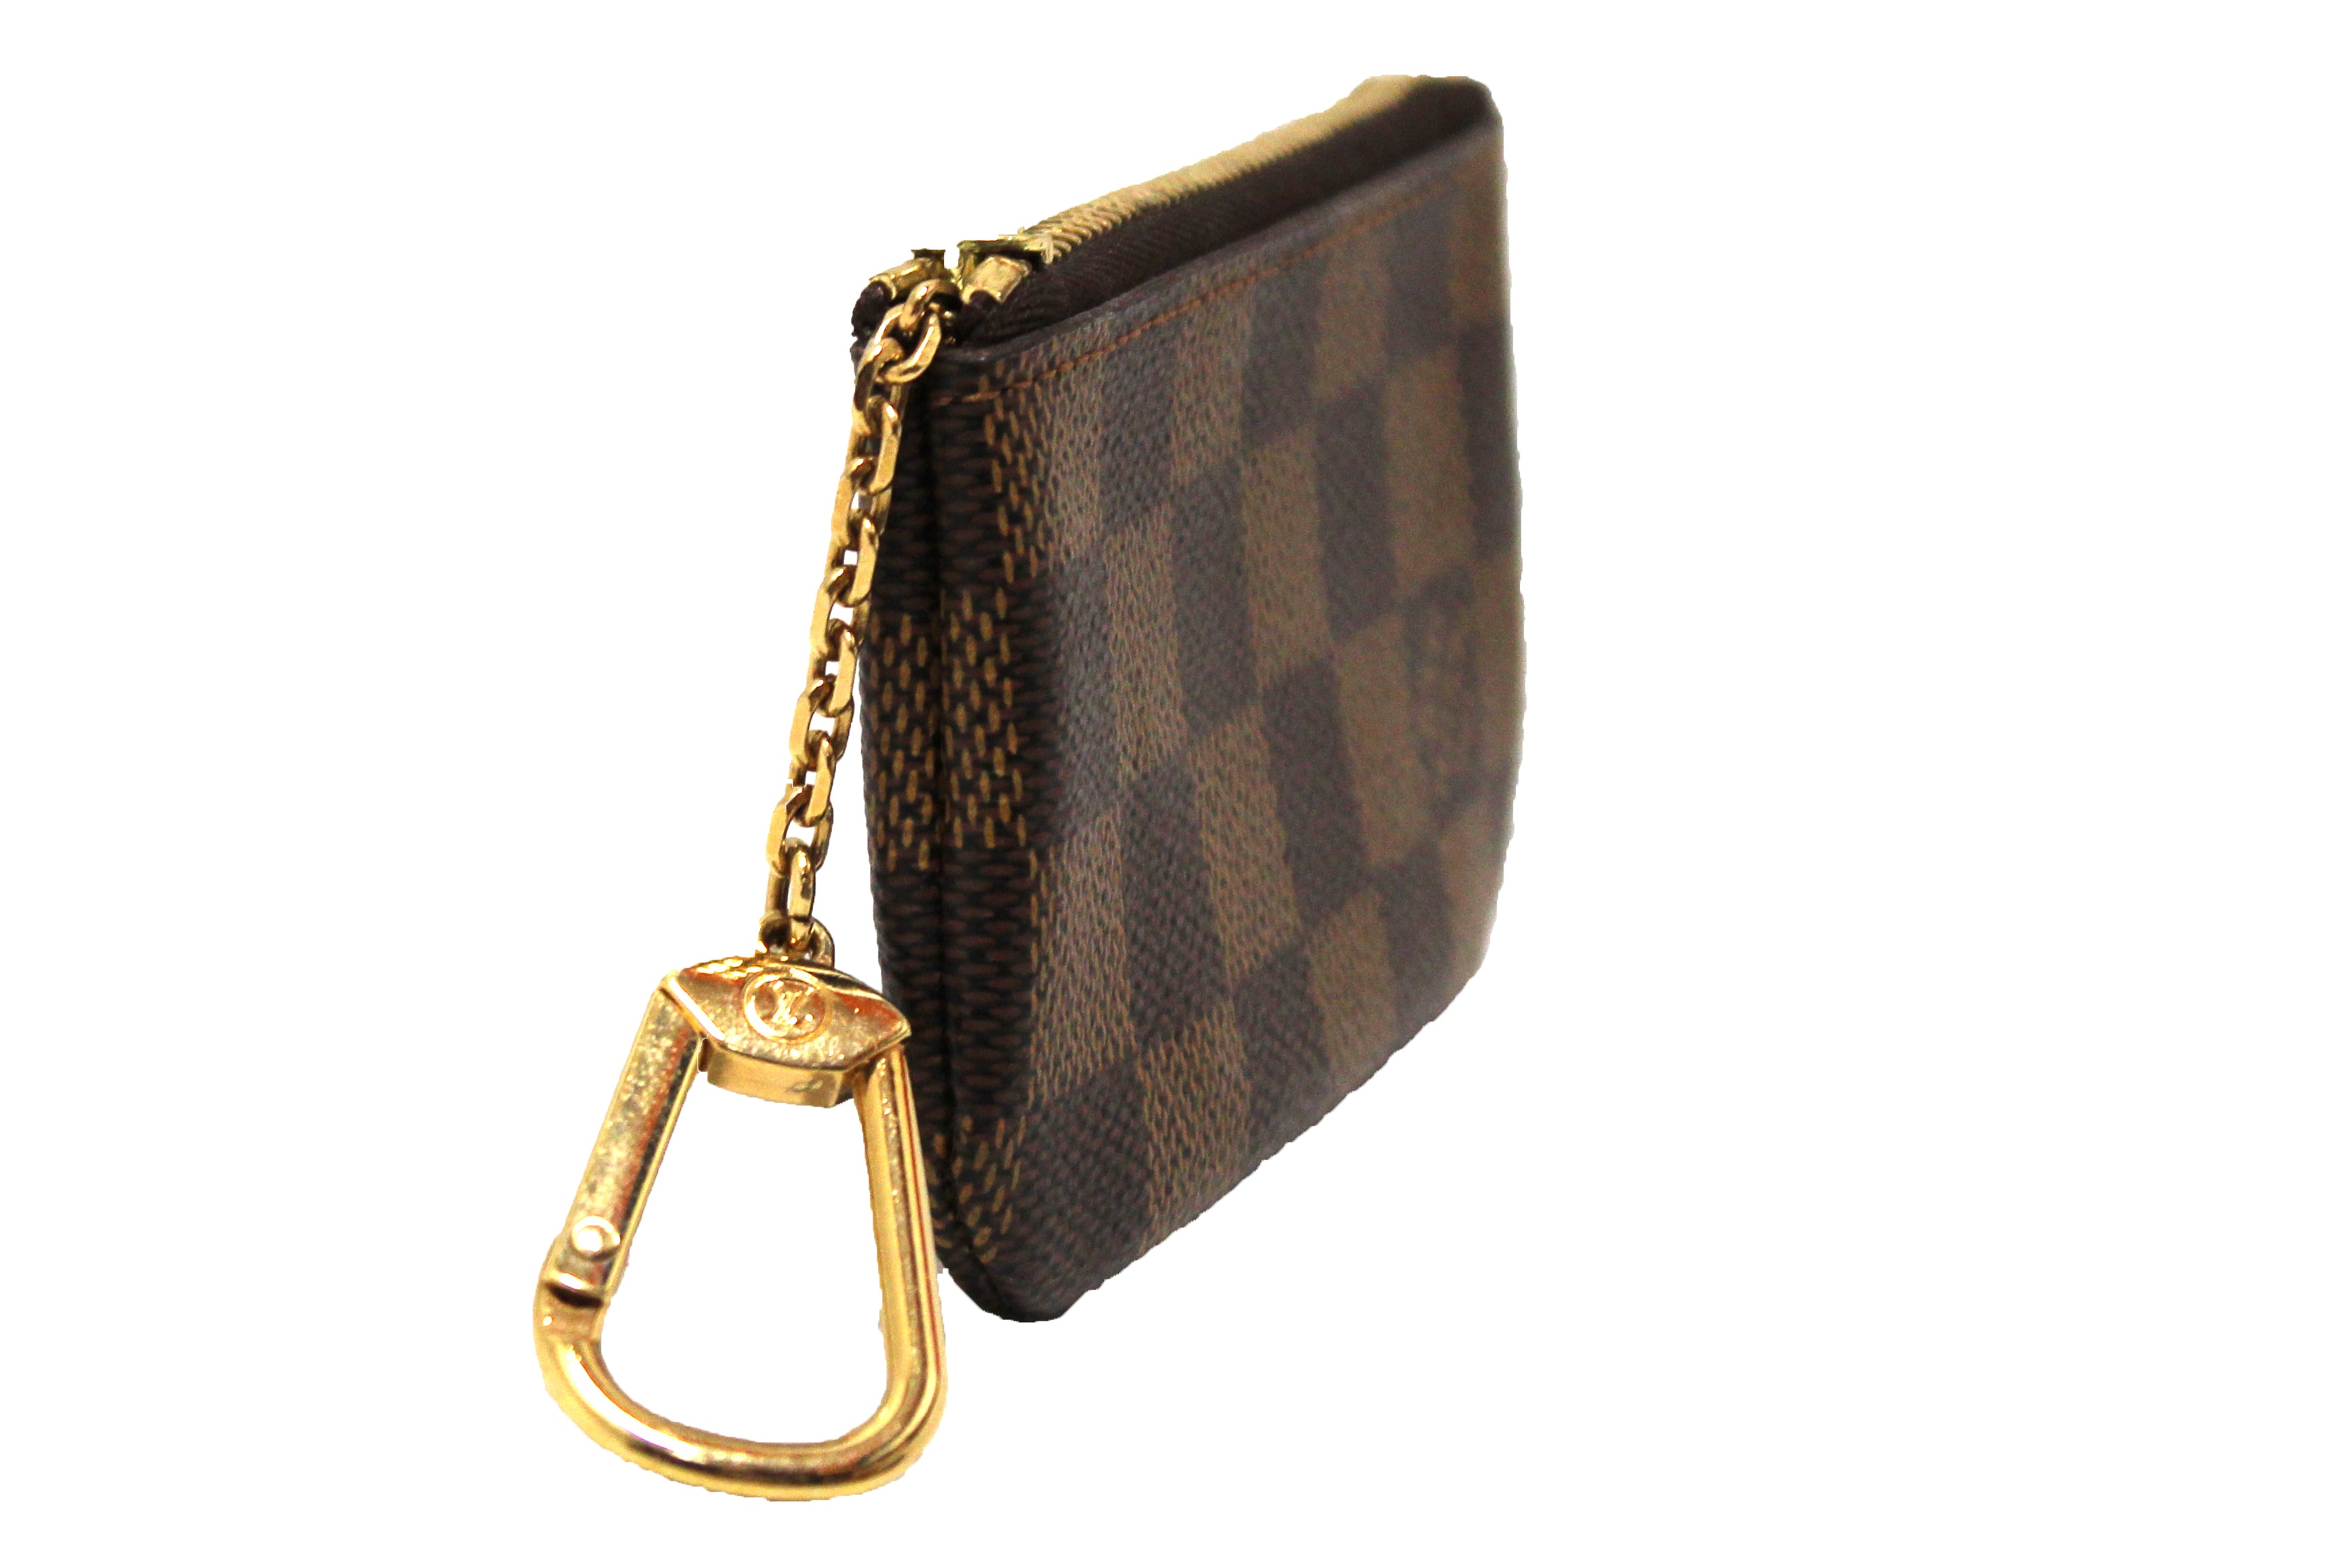 Key Pouch Damier Ebene Canvas - Wallets and Small Leather Goods